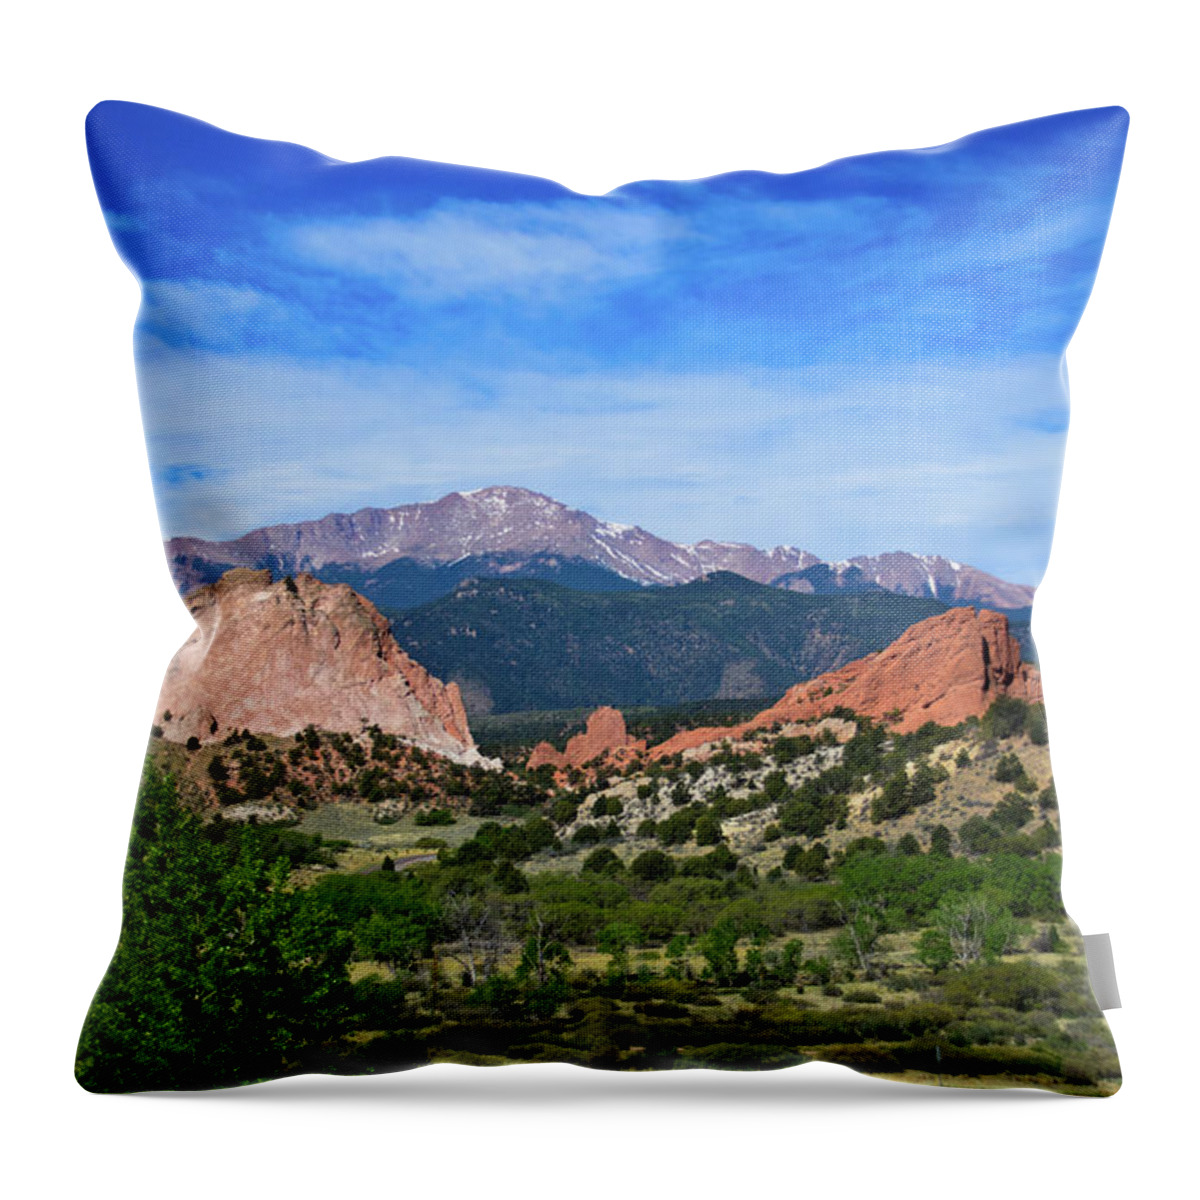 Scenics Throw Pillow featuring the photograph Garden Of The Gods With Pikes Peak by Dan Buettner